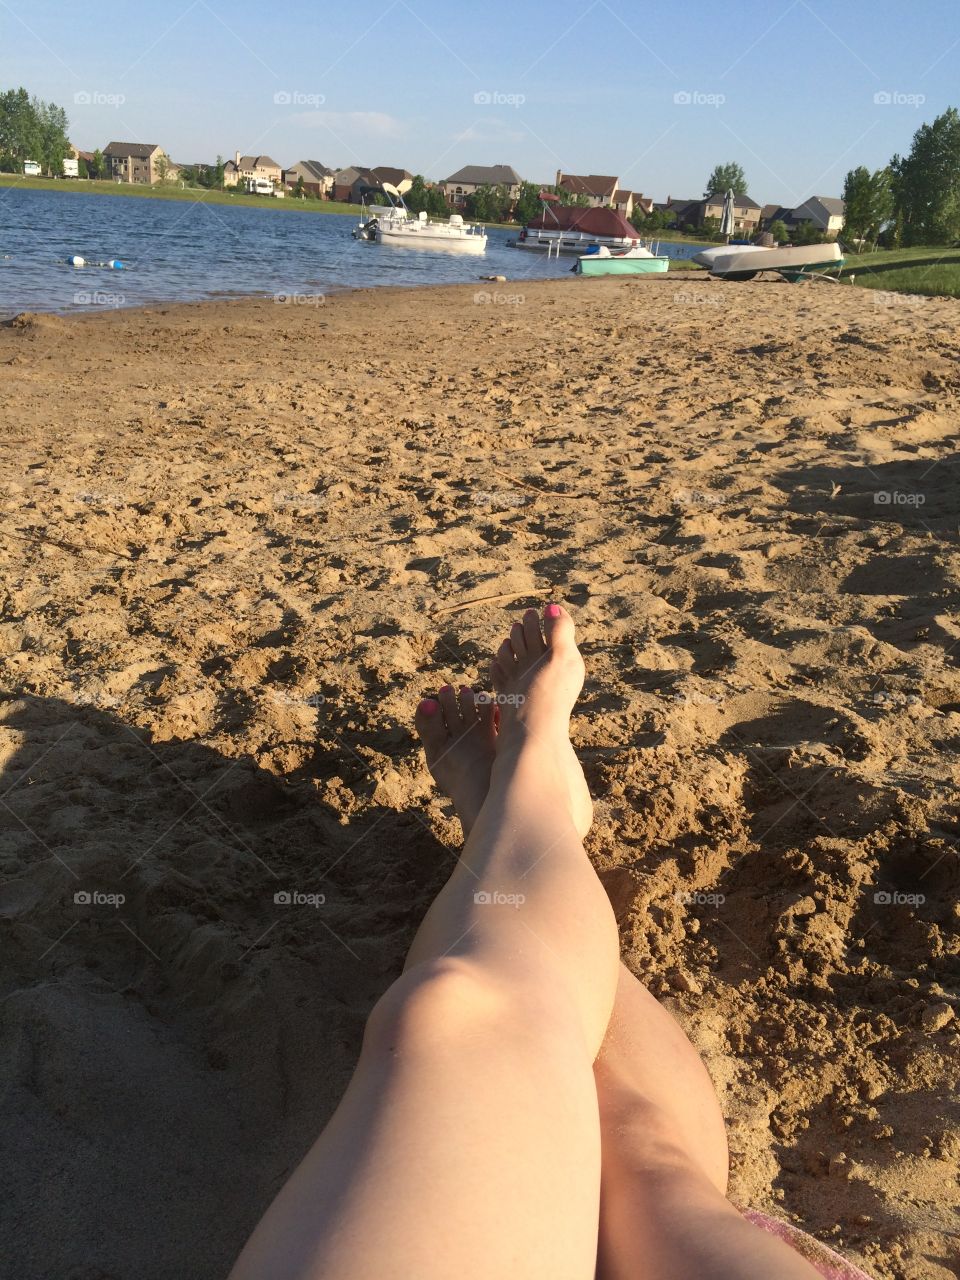 Toes in the sand. Beach pic